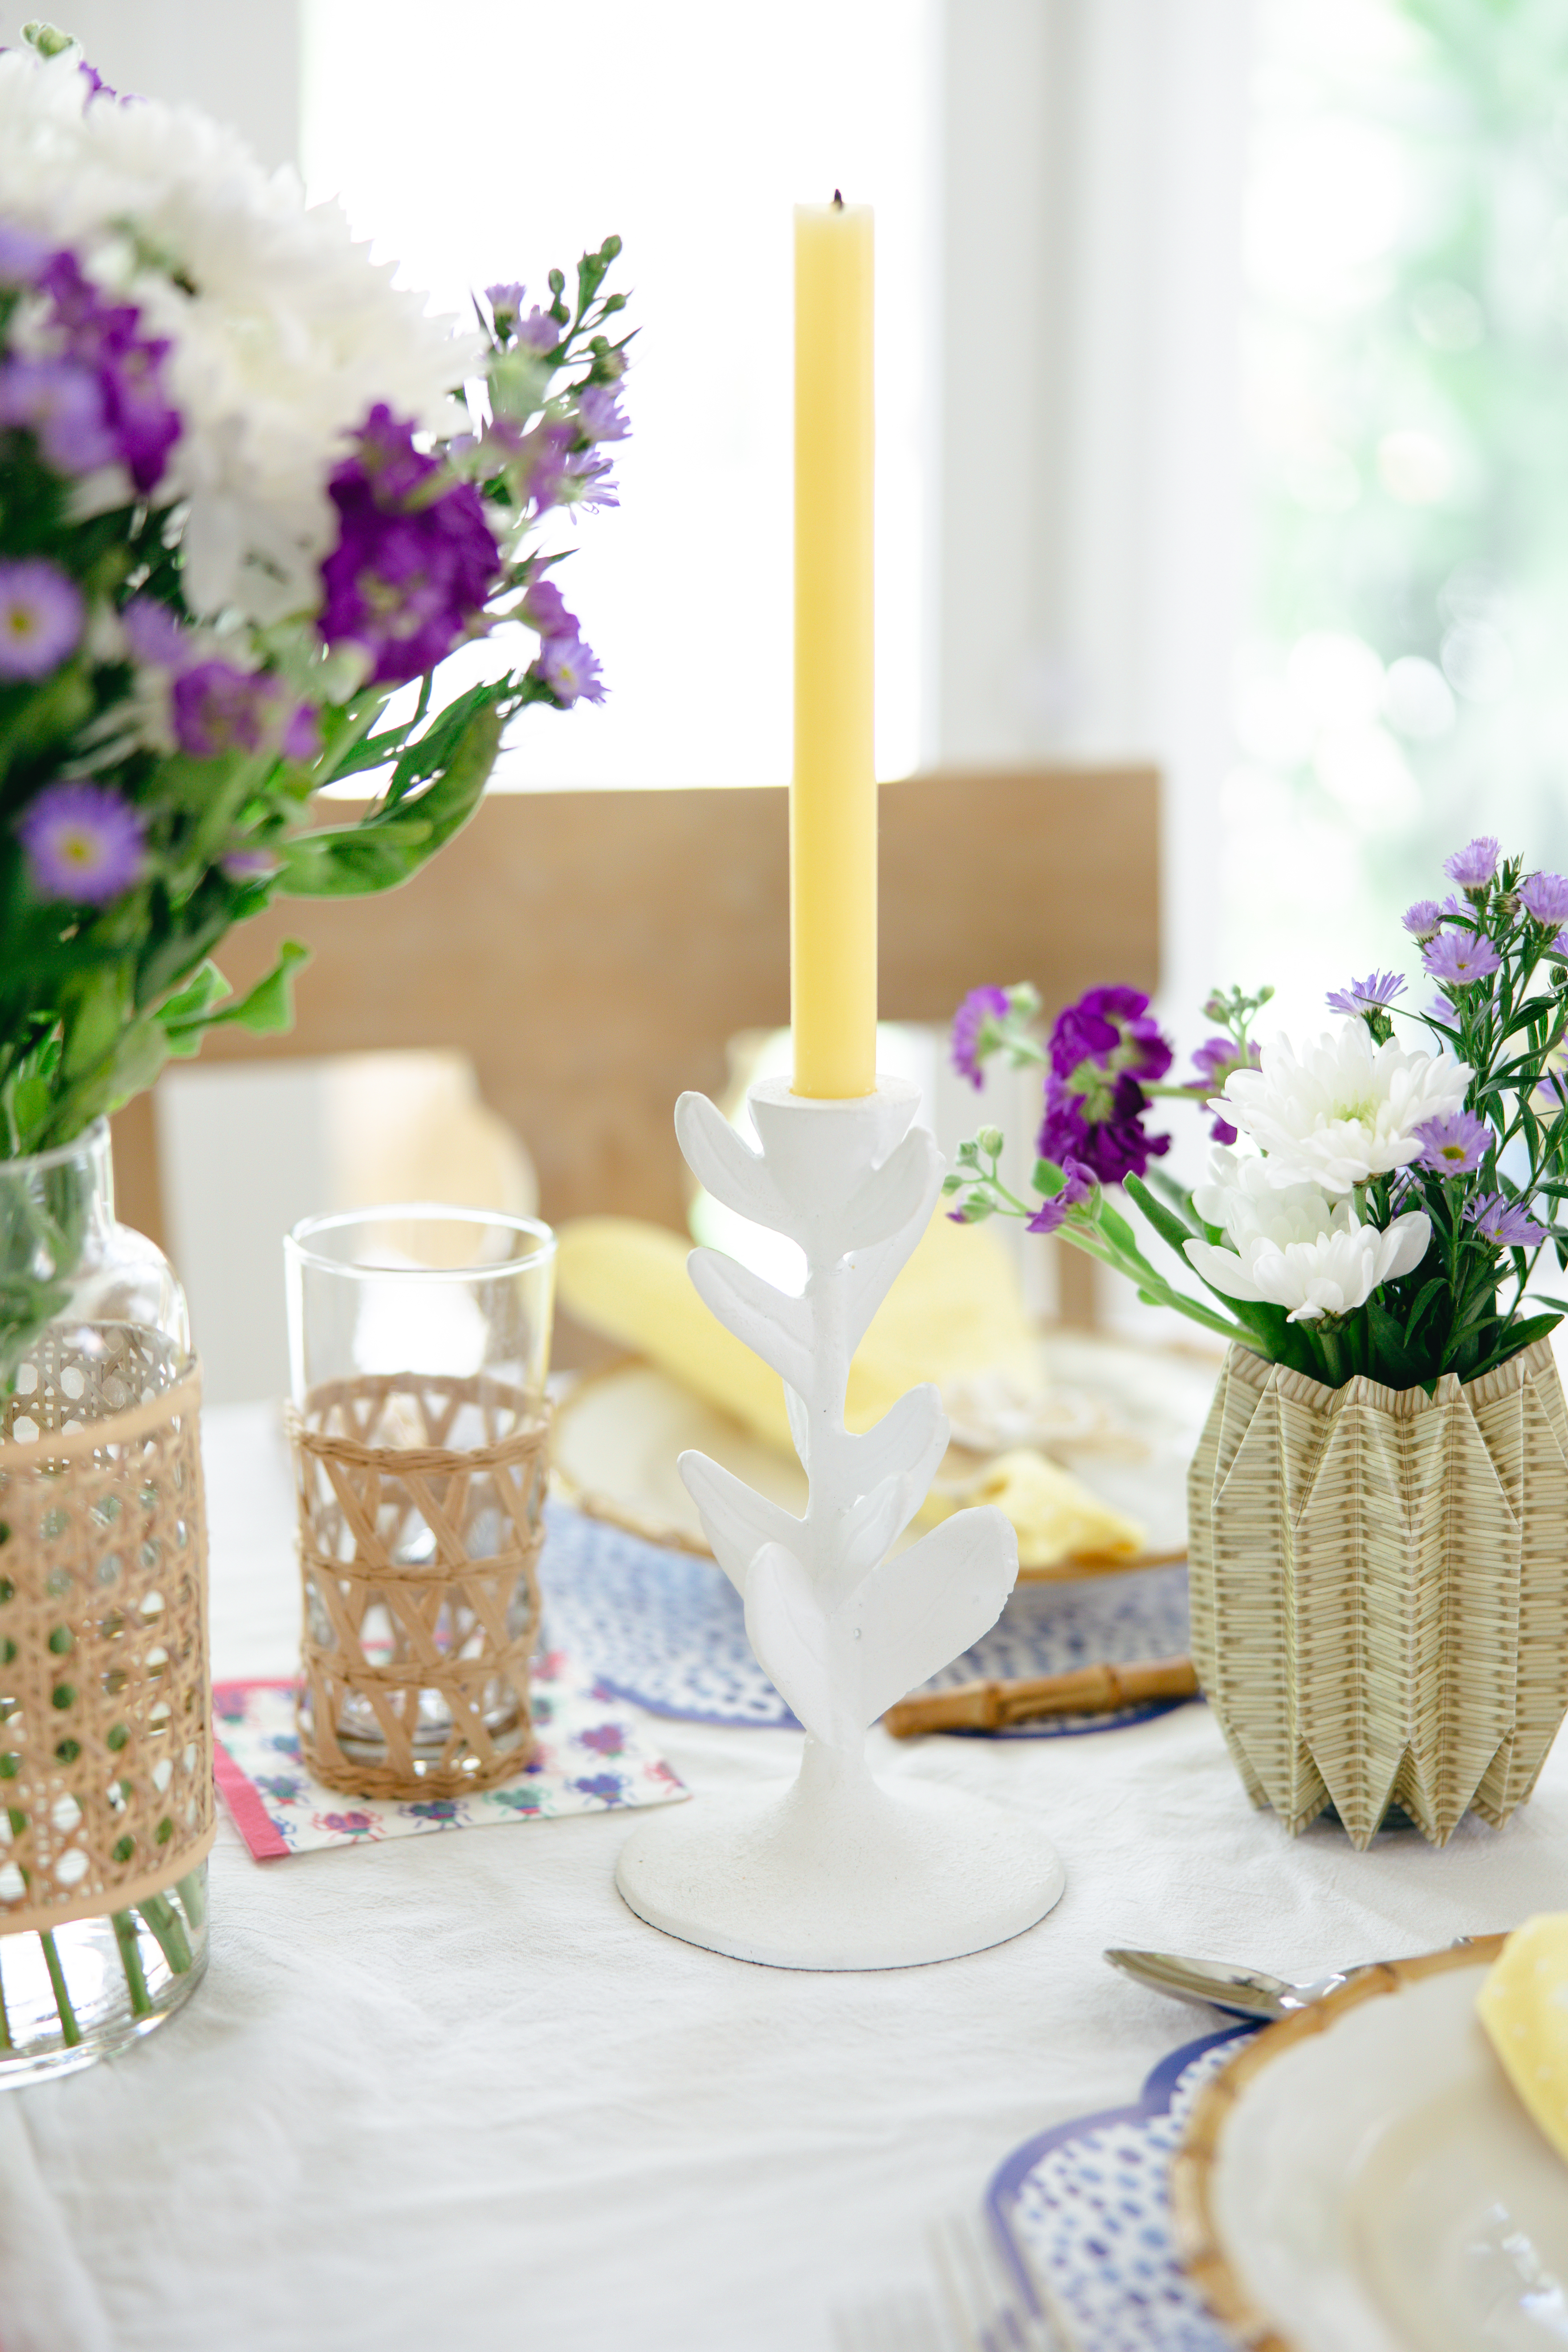 Close up of table and the white floral shaped candle stick and vases.
